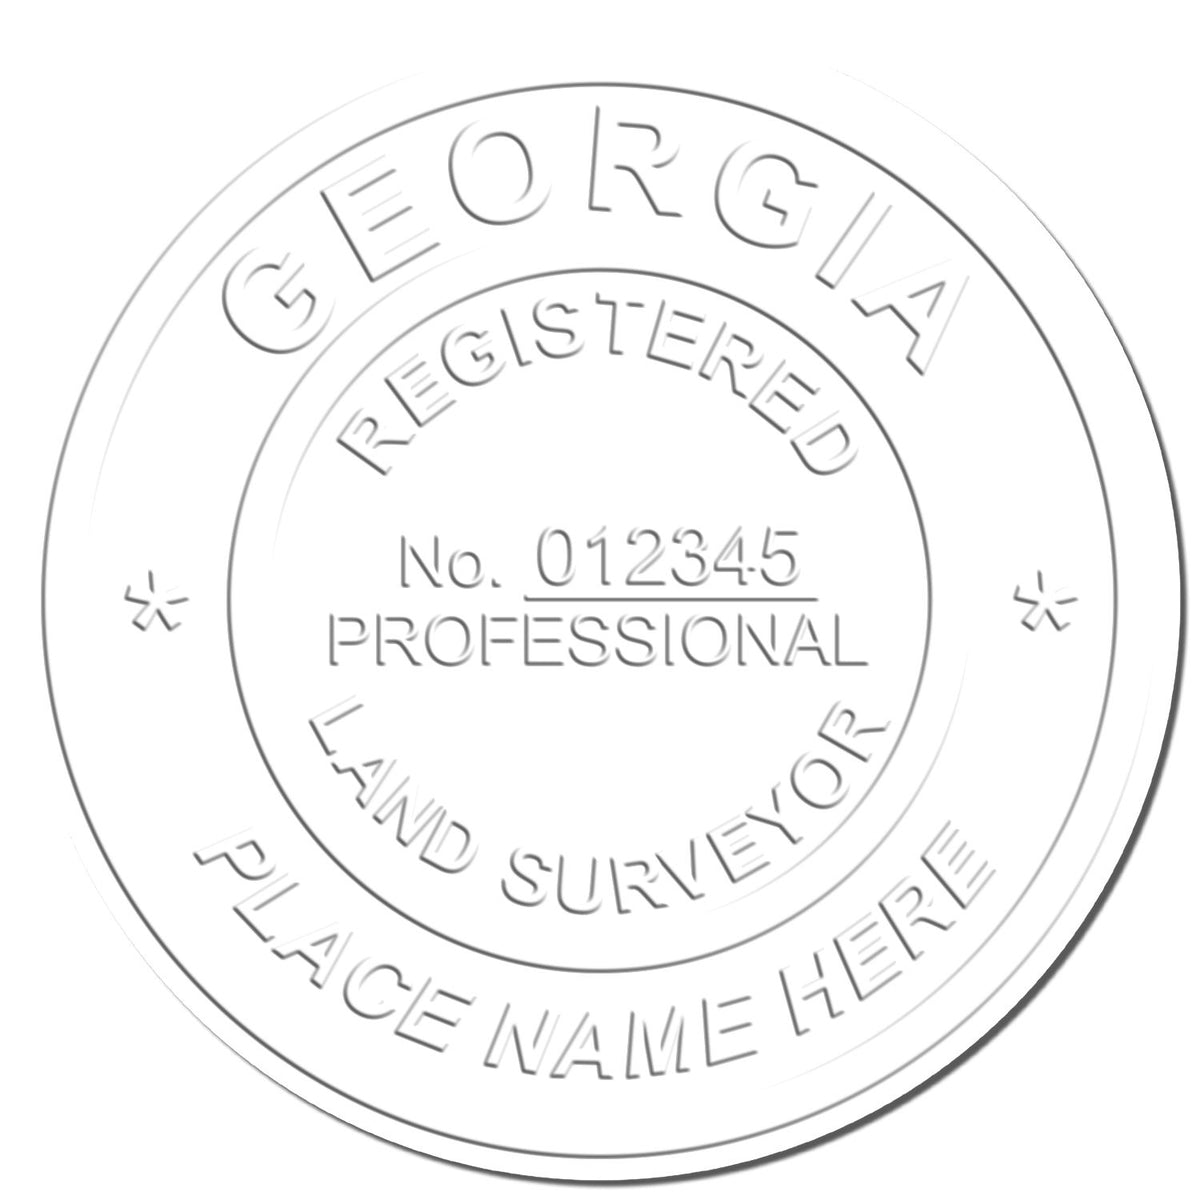 This paper is stamped with a sample imprint of the Georgia Desk Surveyor Seal Embosser, signifying its quality and reliability.